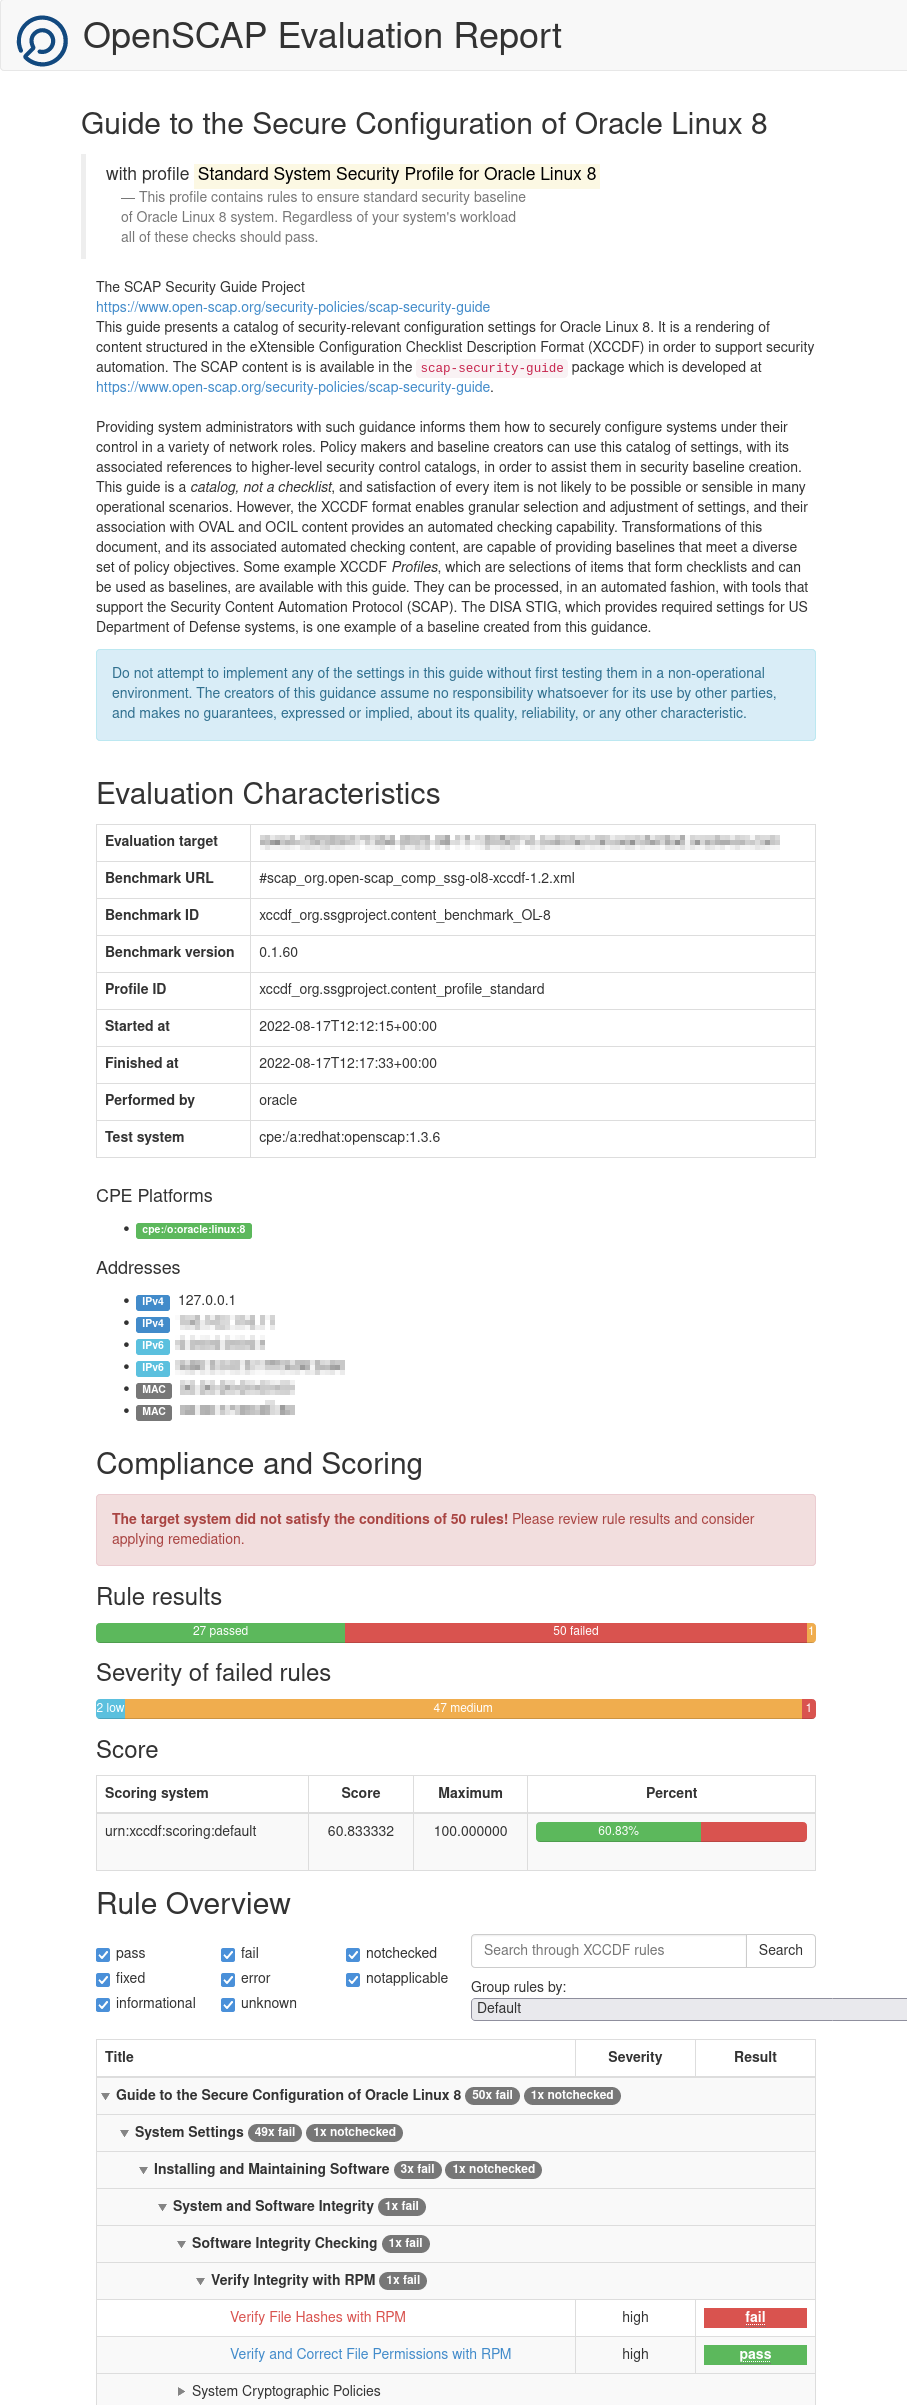 The image shows a partial view of the HTML version of a scan report generated by oscap. The top of the report contains the title and the report description. A summary information is provided based on evaluation characteristics, overall score with regards to compliance, and the severity of any reported failed flags. The rest of the report contains more detailed information about each scan action.